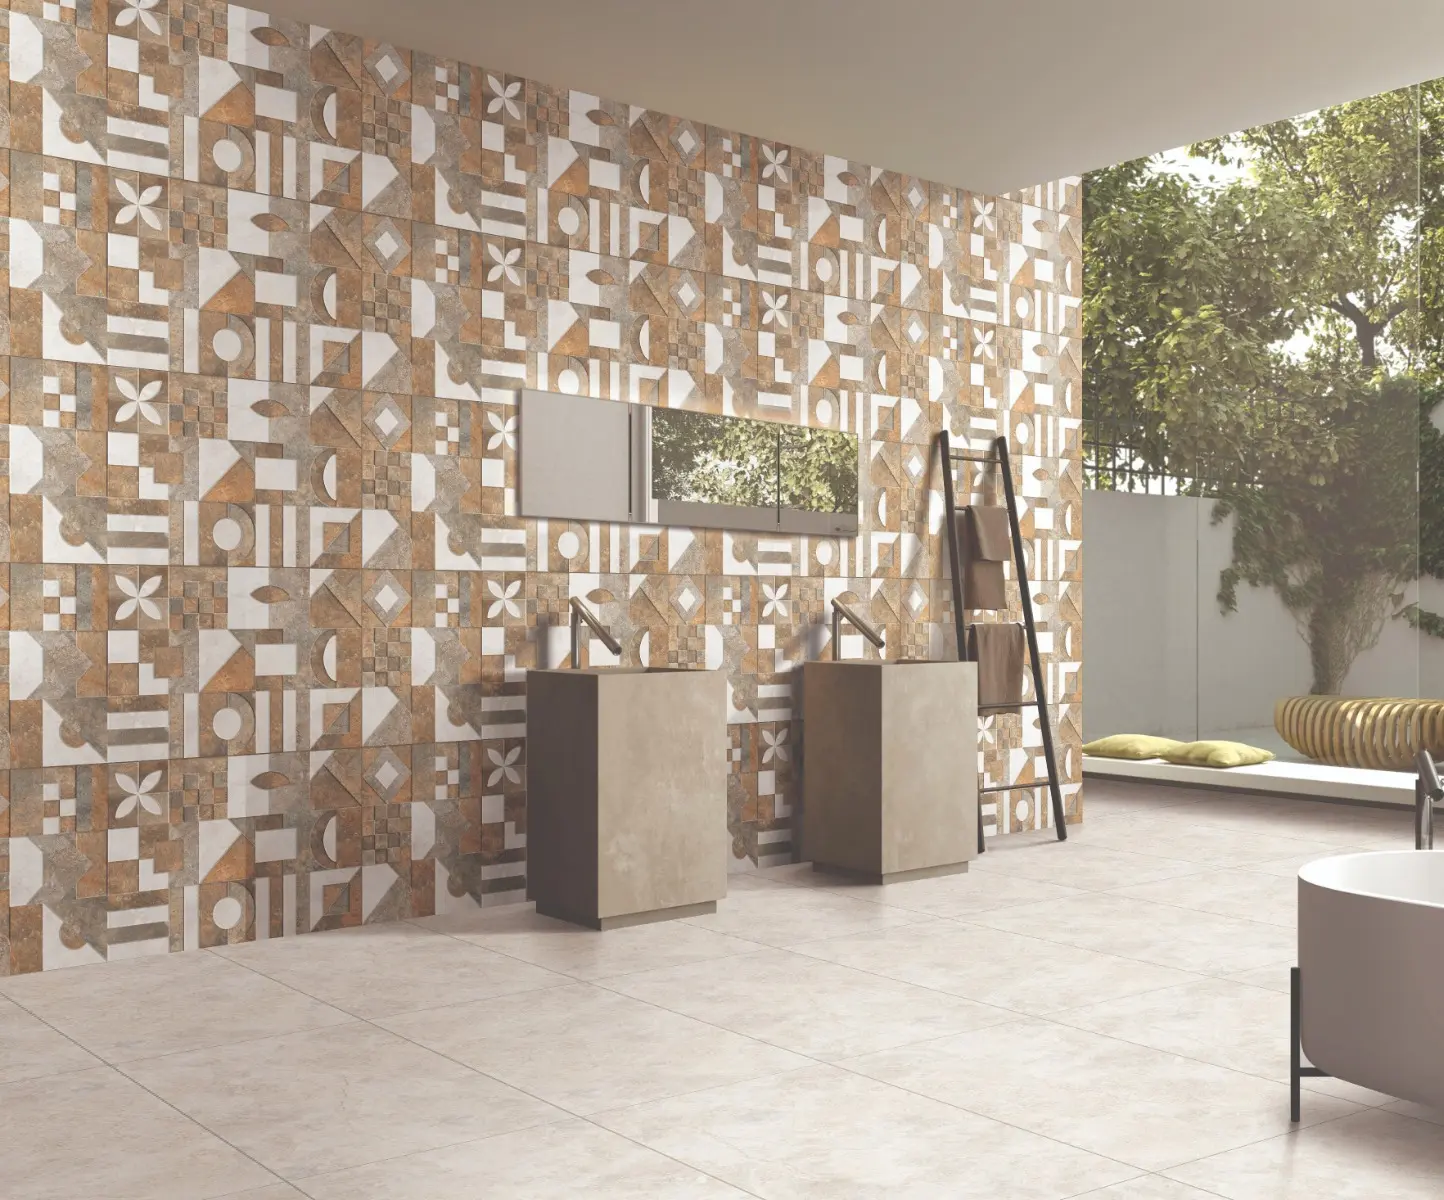 Where to Buy Wall & Floor Tiles in Colombia?